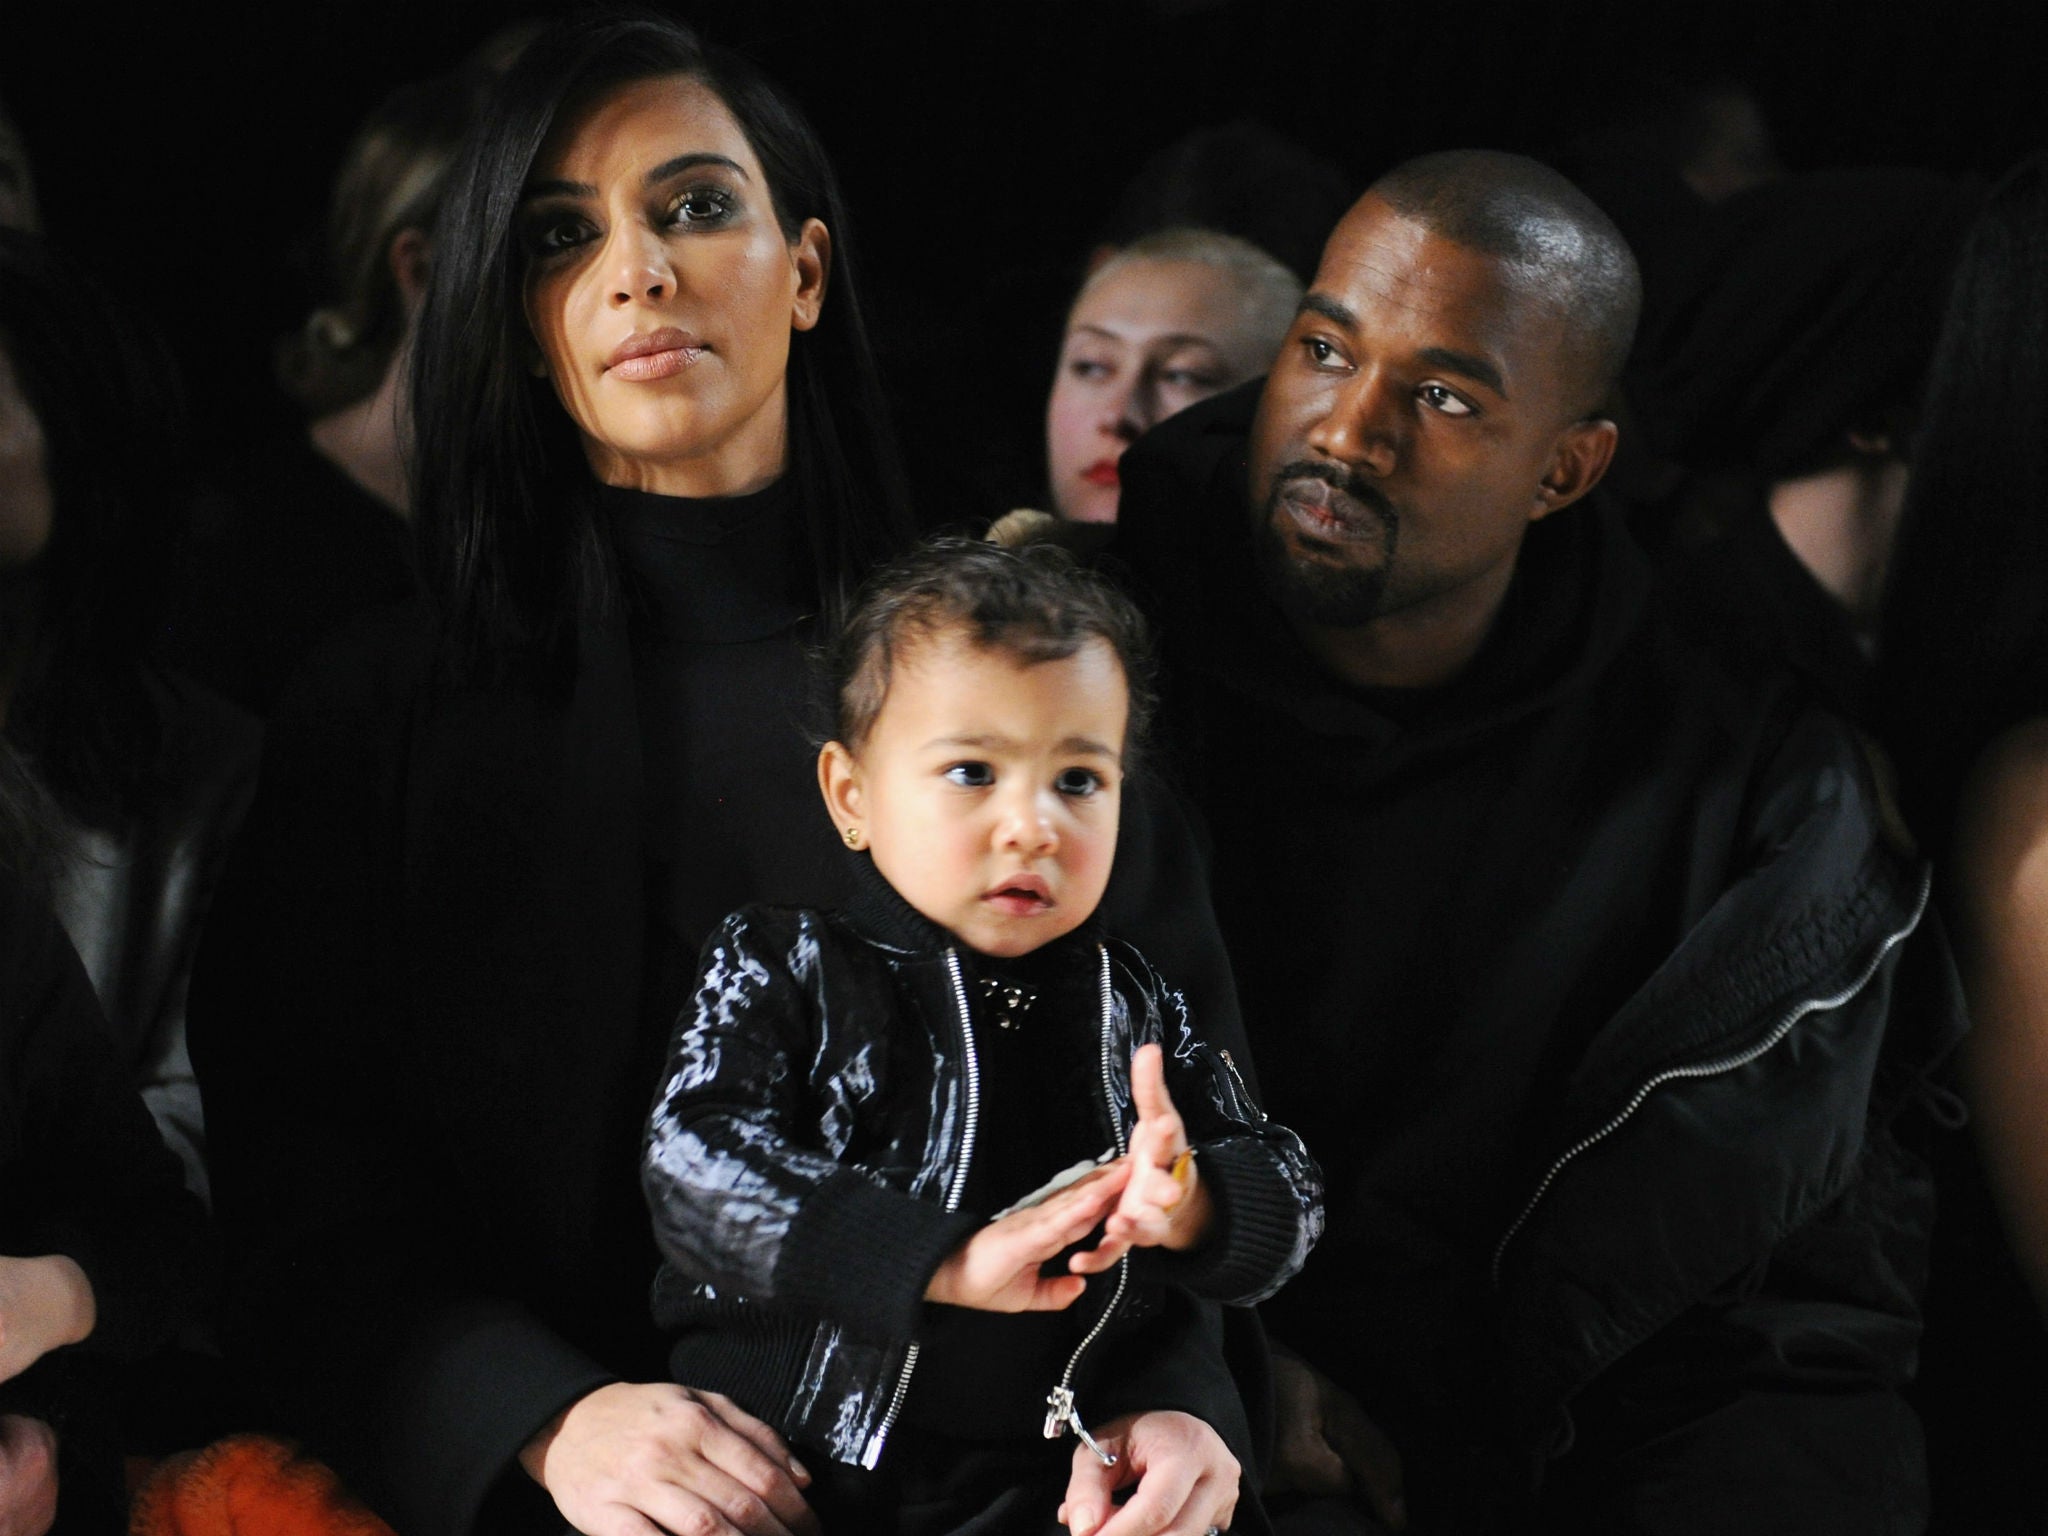 Saint is the newest addition to the family who are pictured watching the Alexander Wang NYFW show in February